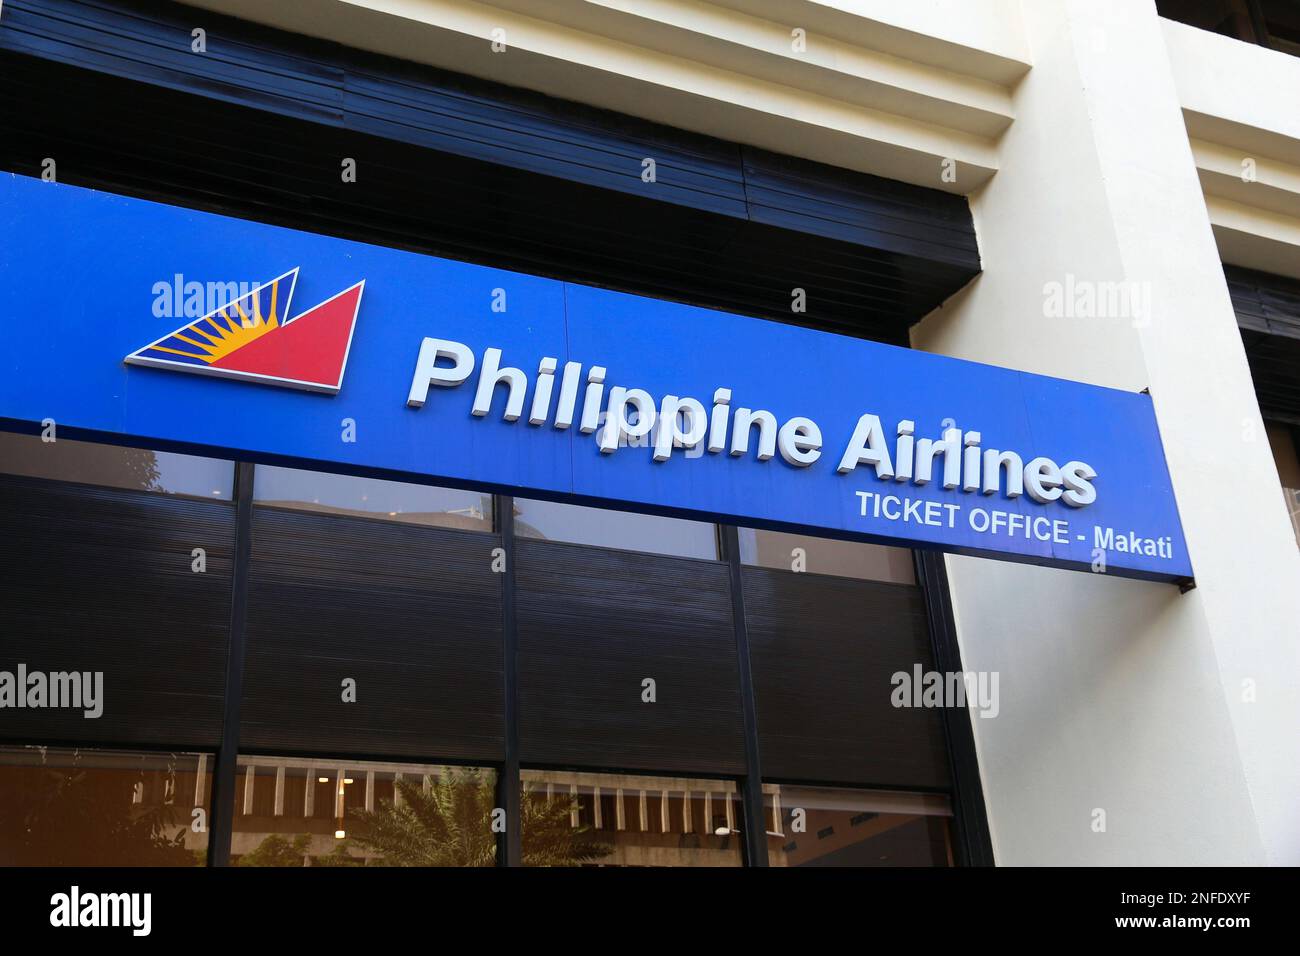 MANILA, PHILIPPINES - NOVEMBER 28, 2017: Philippine Airlines ticket office in Makati, Manila. Philippine Airlines is the flag carrier of the Philippin Stock Photo